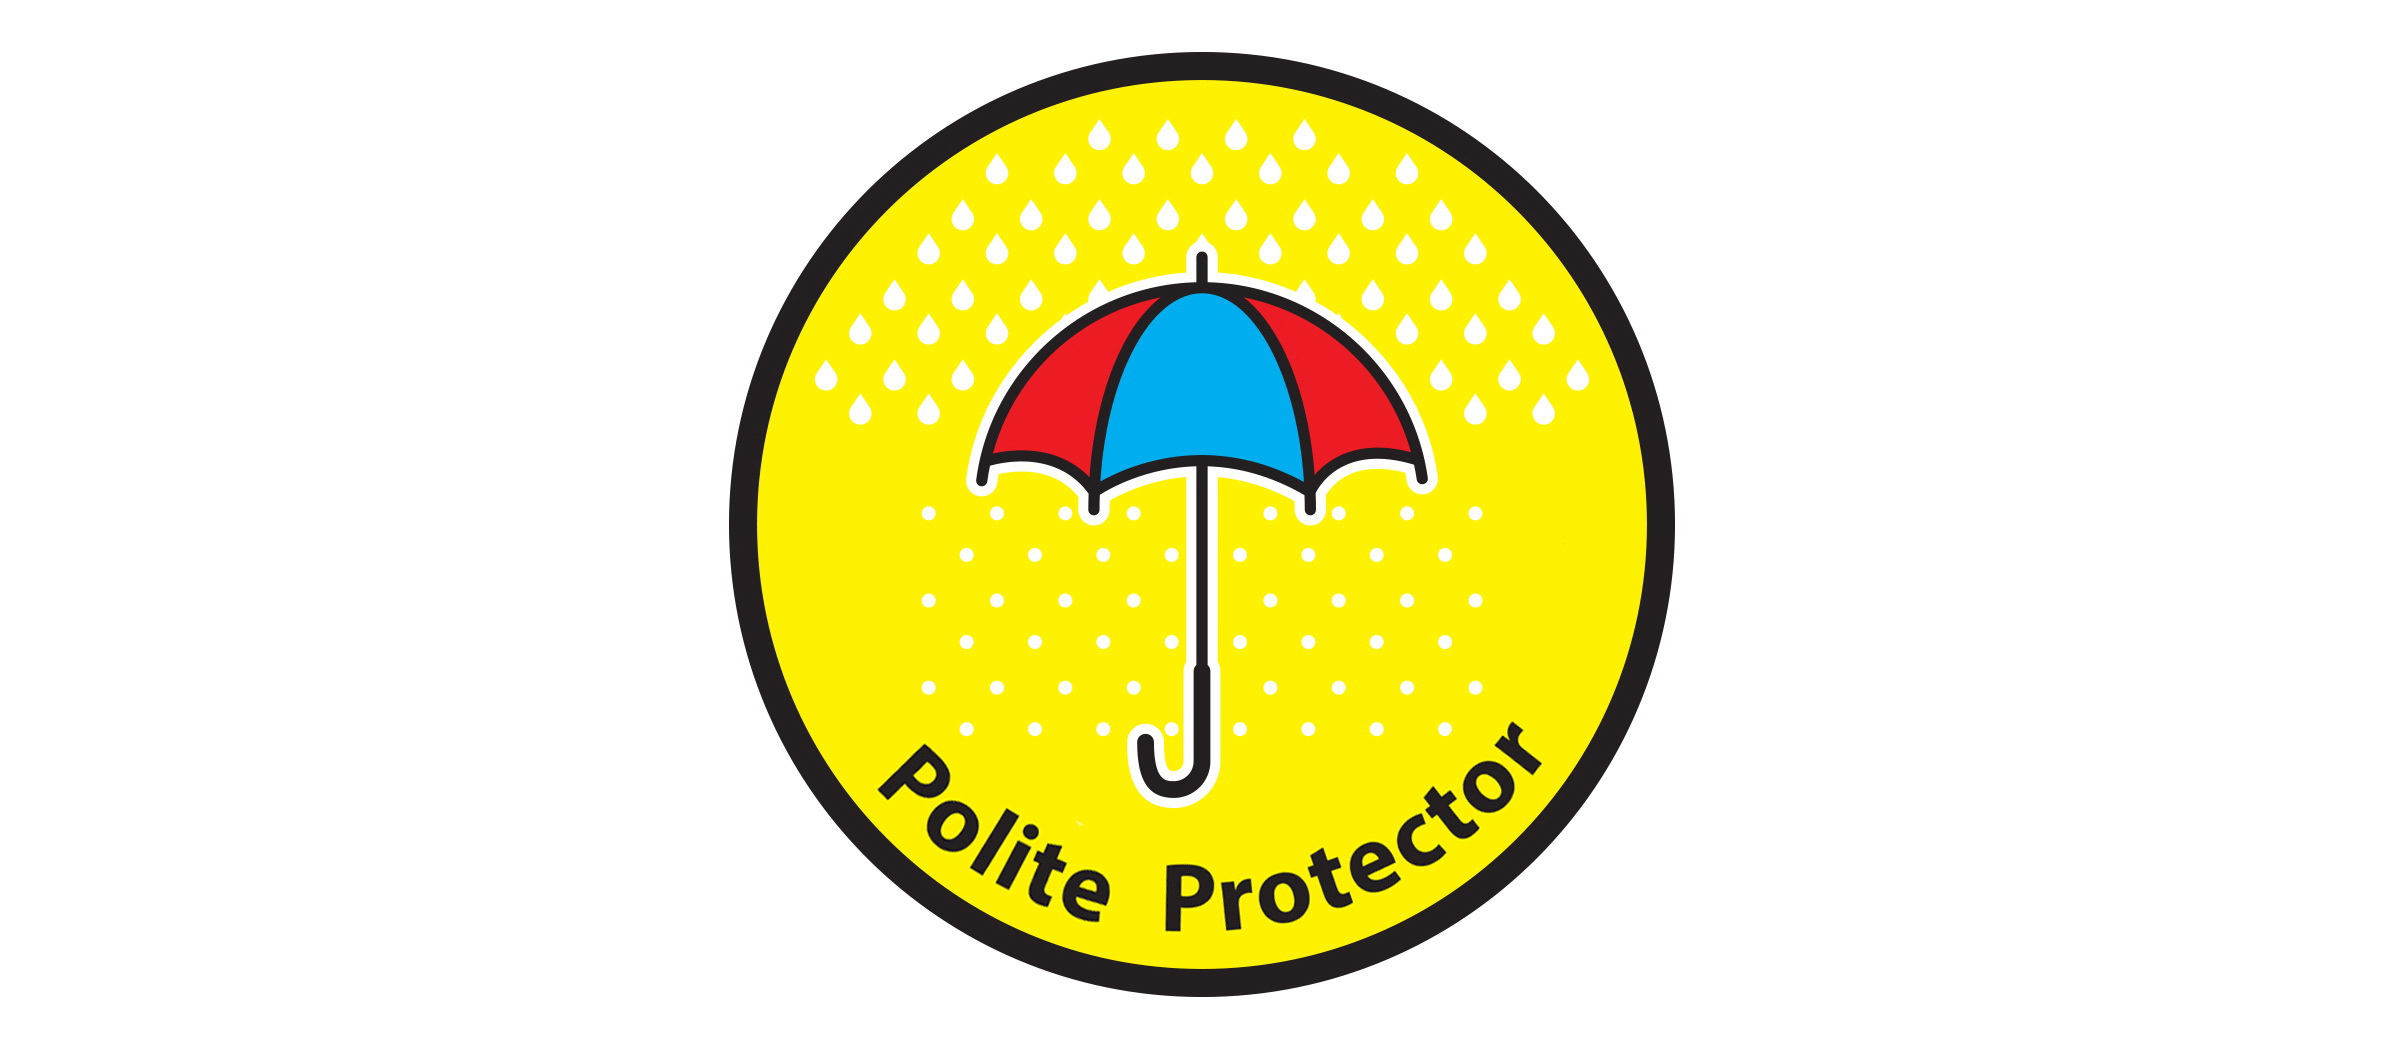 Polite Concepts is an accessory invention that allows us to protect our bags and other items during  bad weather